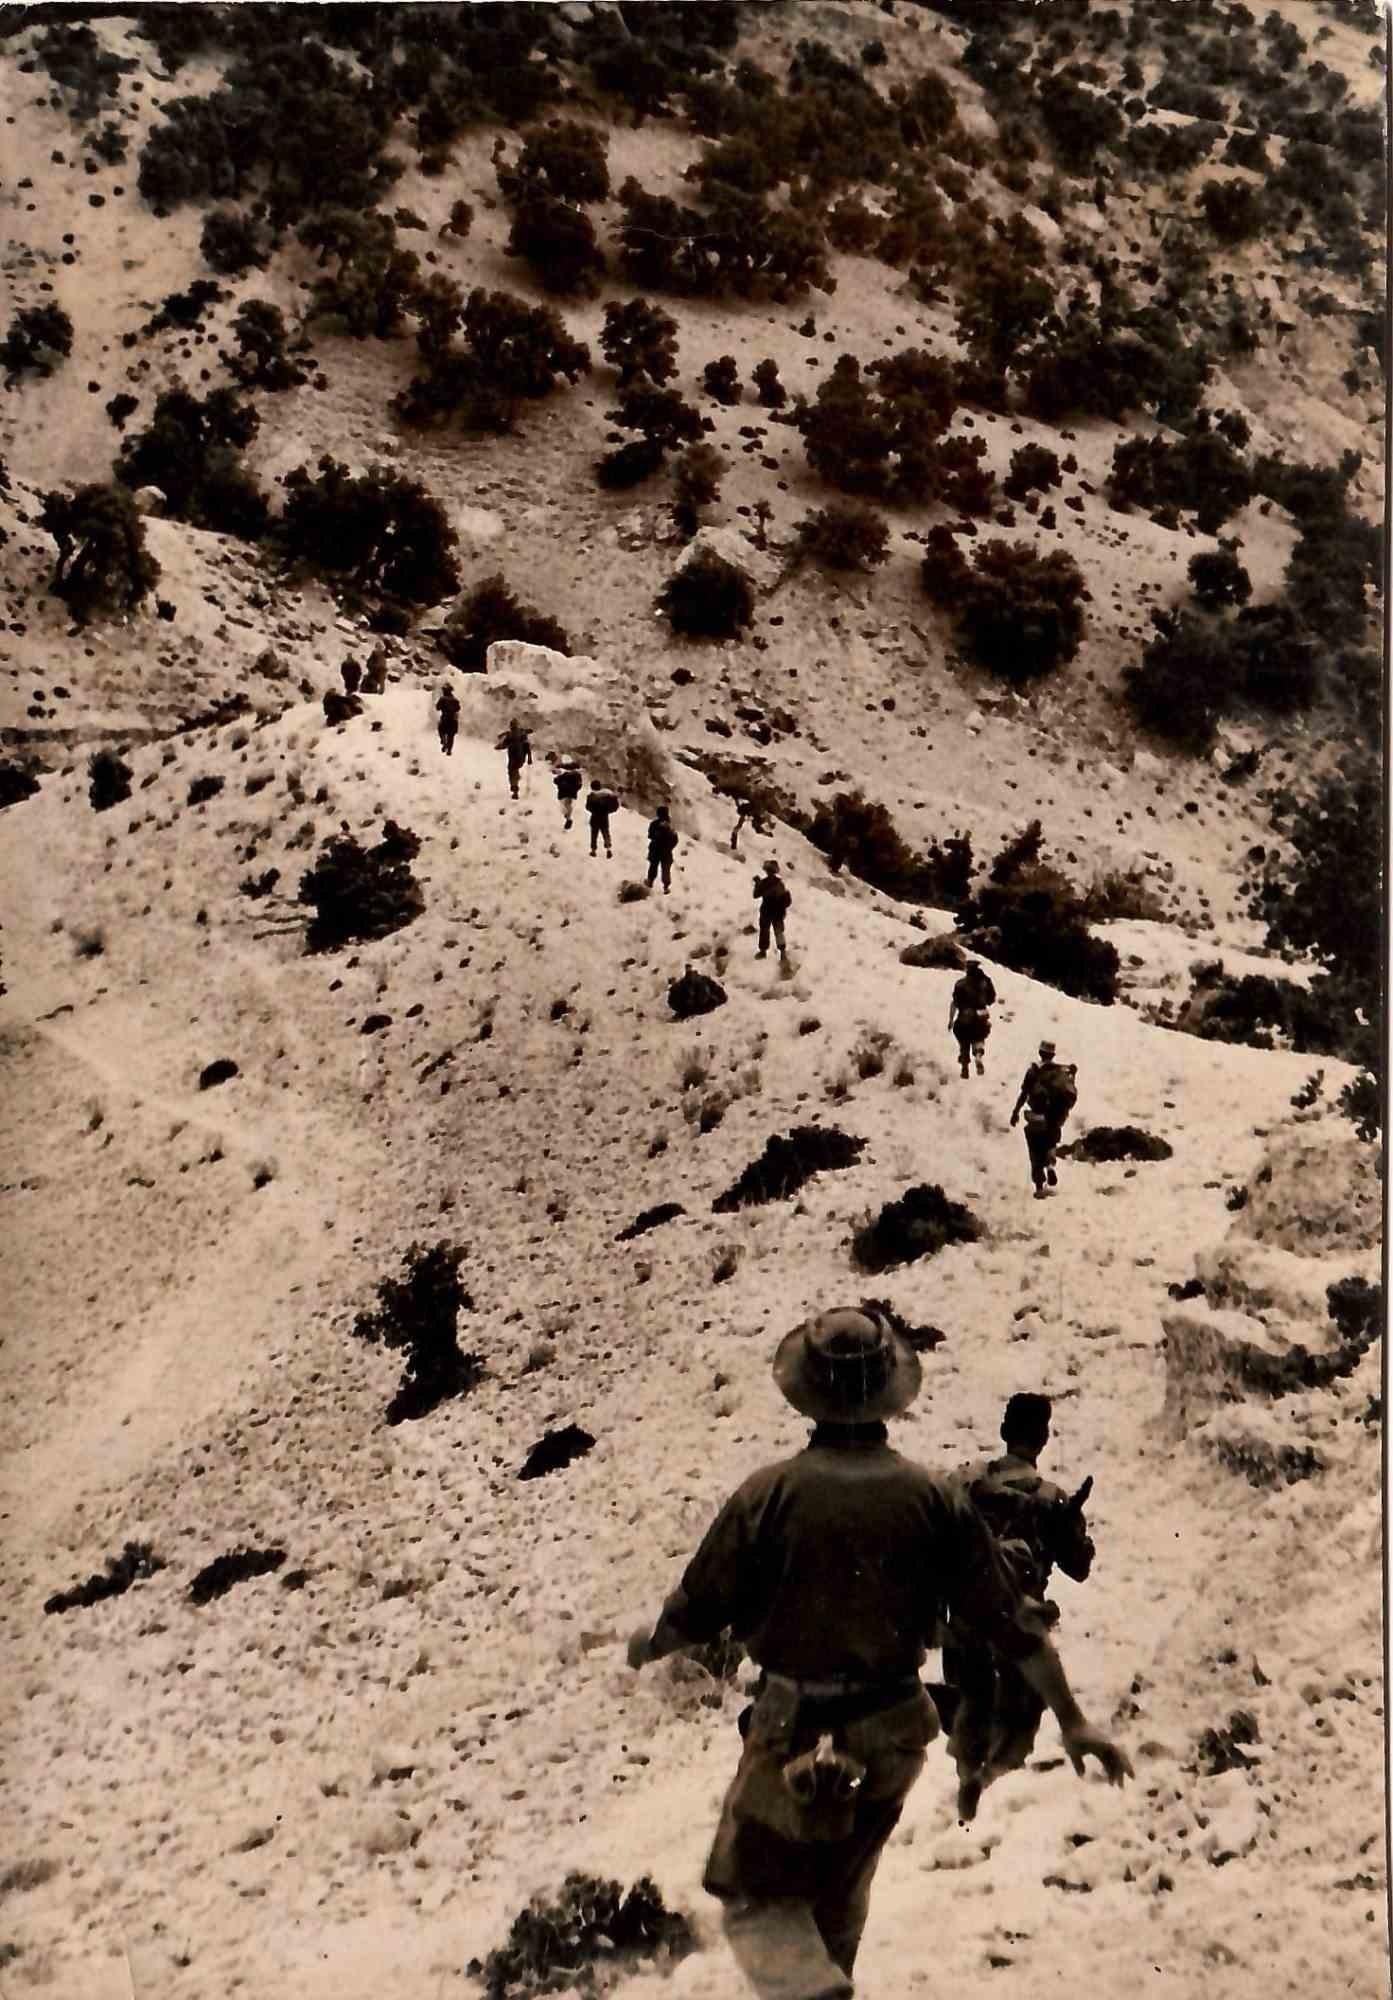 Unknown Figurative Photograph - Military in Algeria - Vintage Photograph - Mid-20 Century